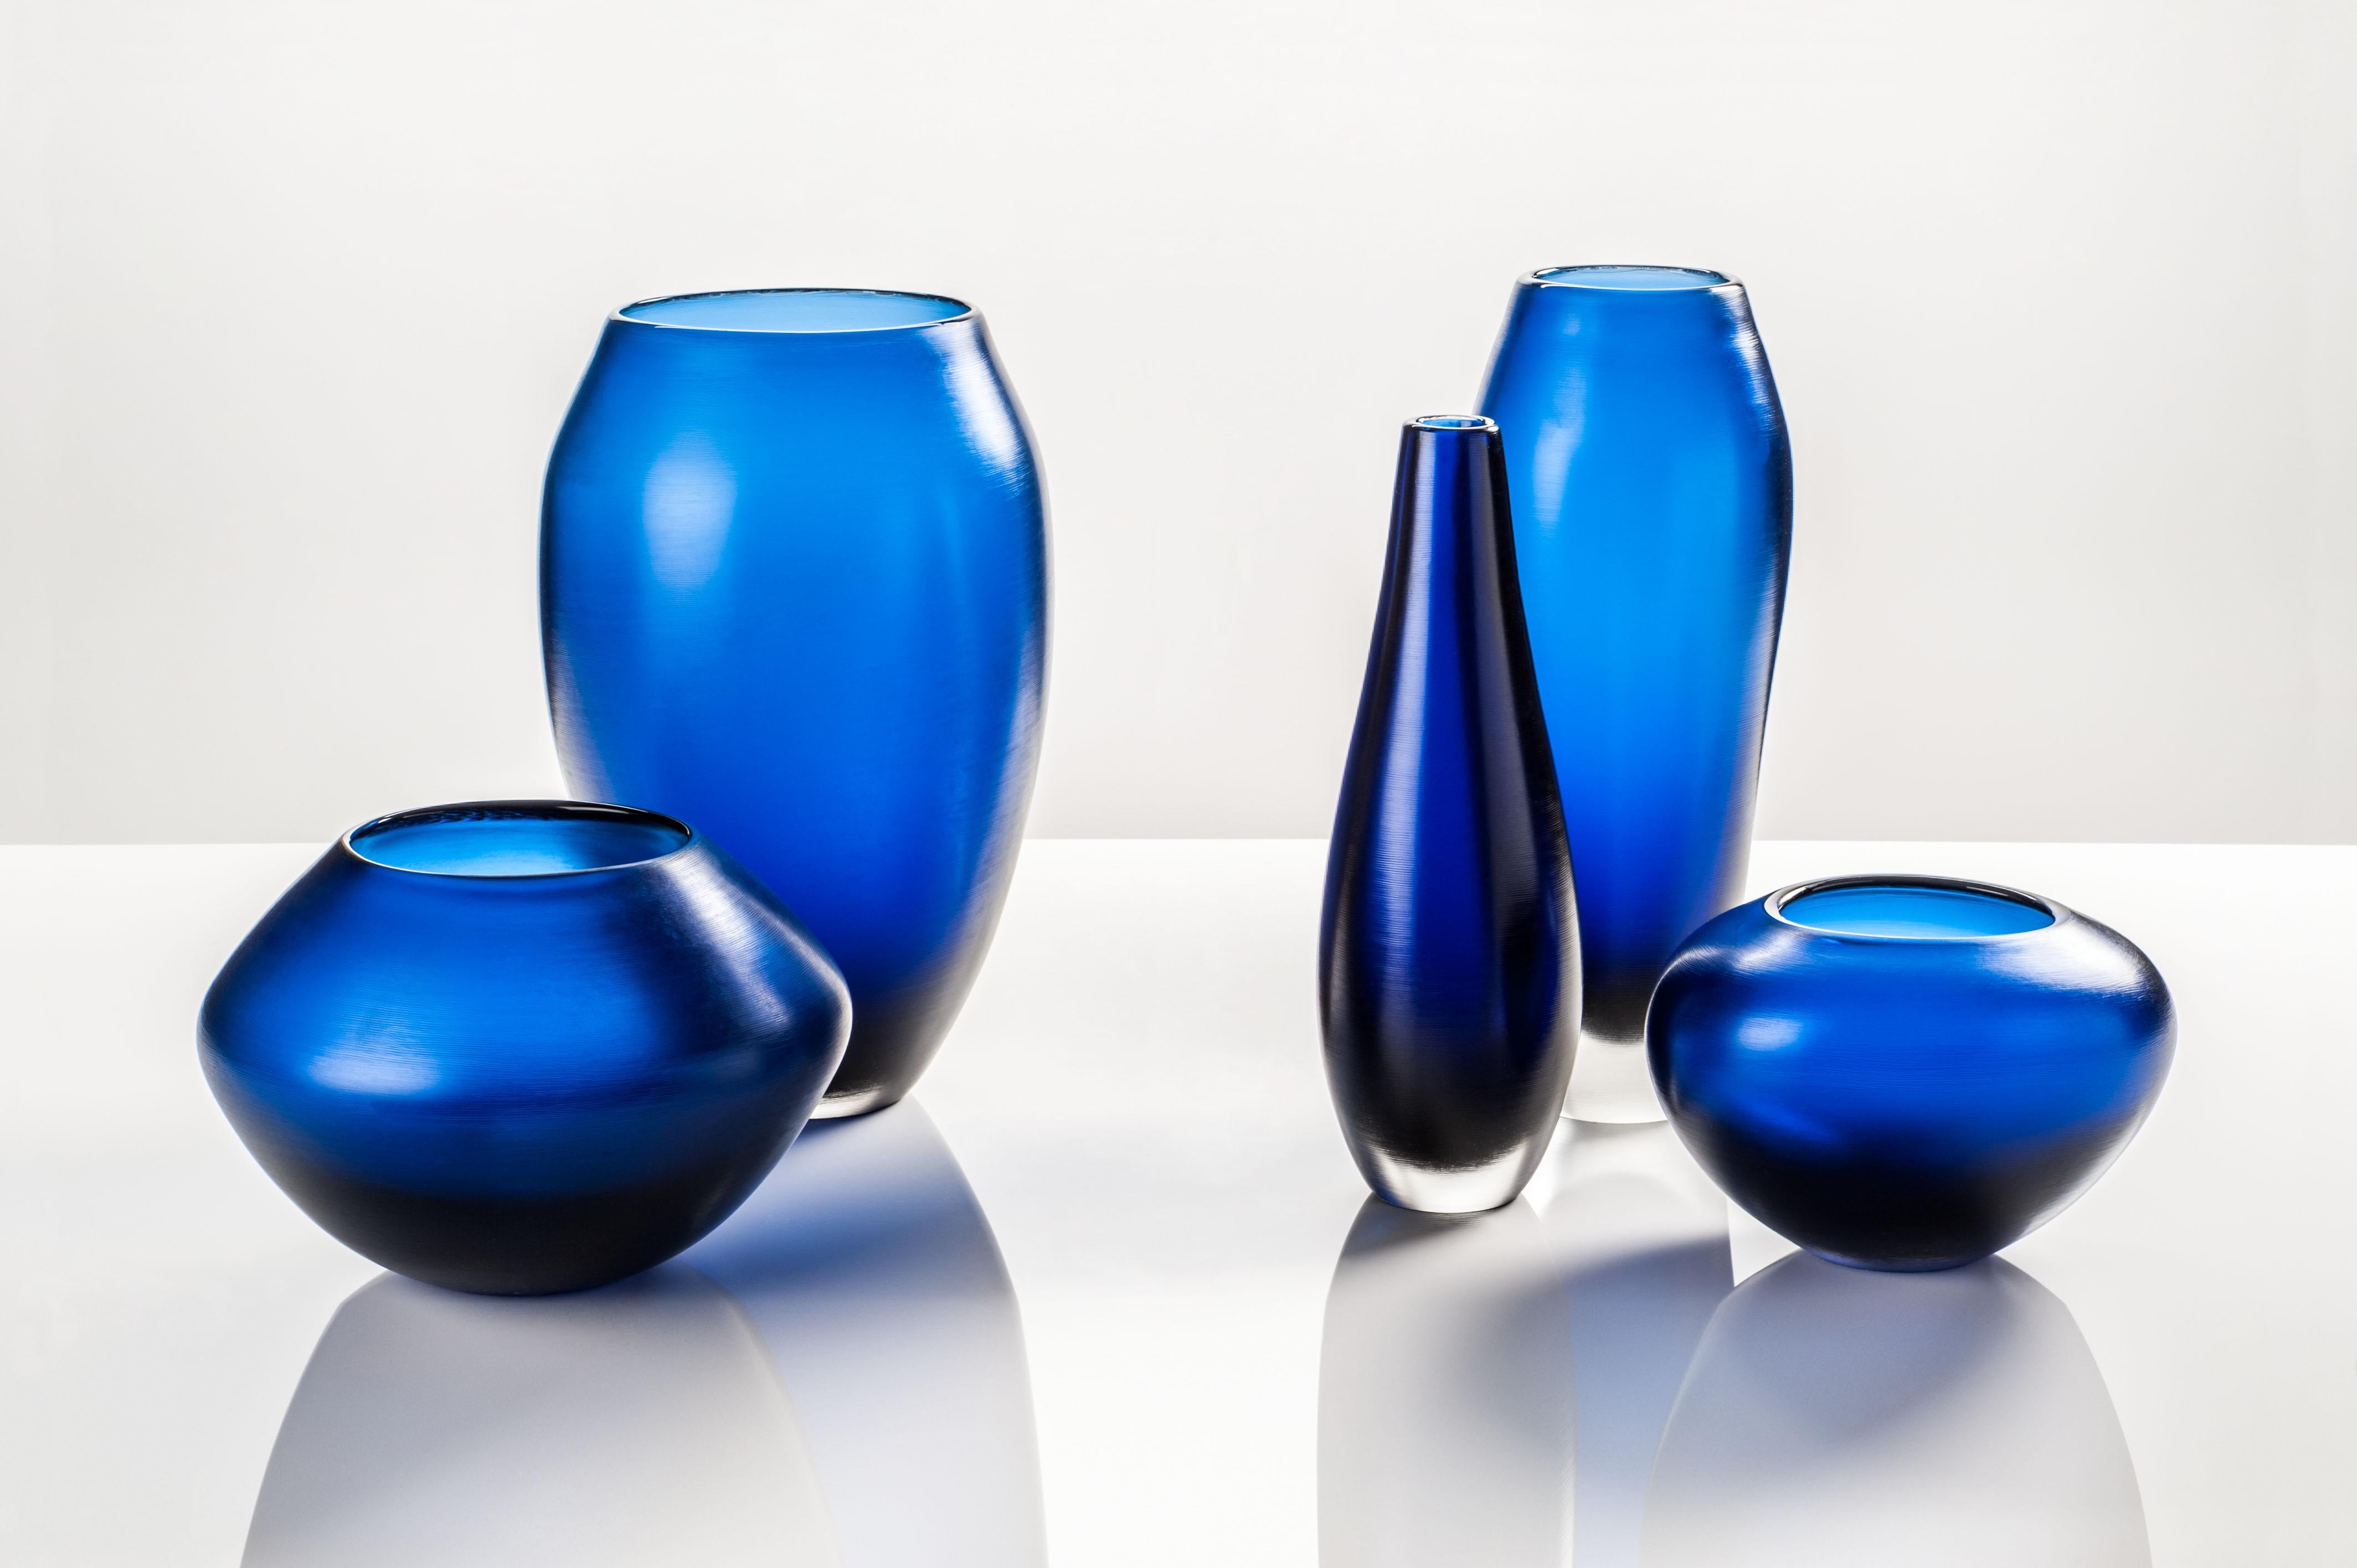 Incisi glass vase collection, designed by Paolo Venini and manufactured by Venini, feature an engraved surface. Originally designed in 1956. Numbered edition per year, marine blue versions are available in a limited edition of 19 art pieces.
Indoor